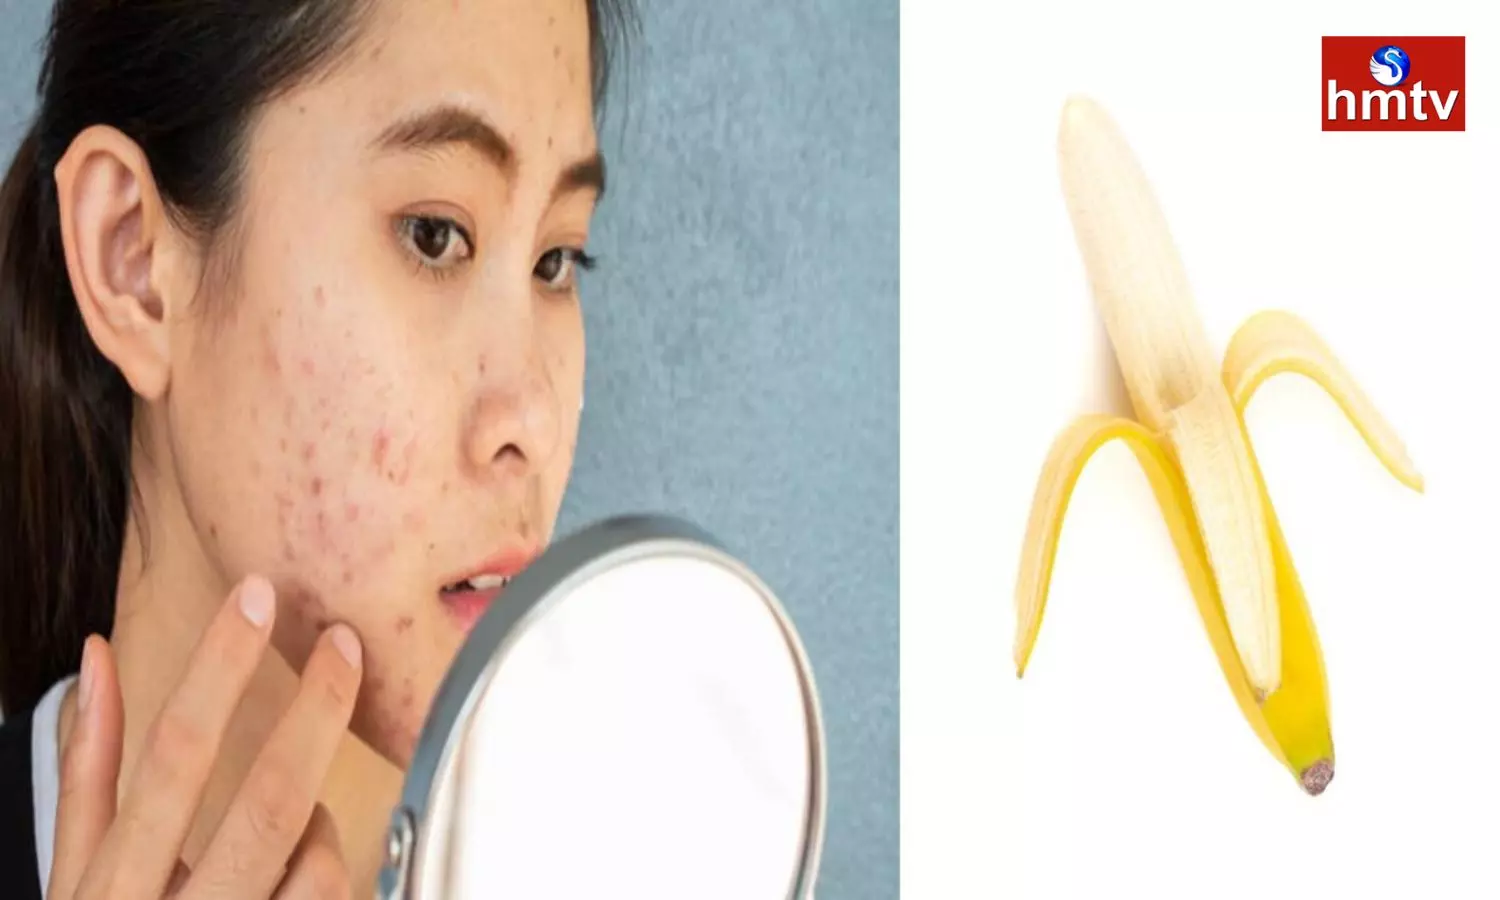 Check for Pimples on the Face With a Banana